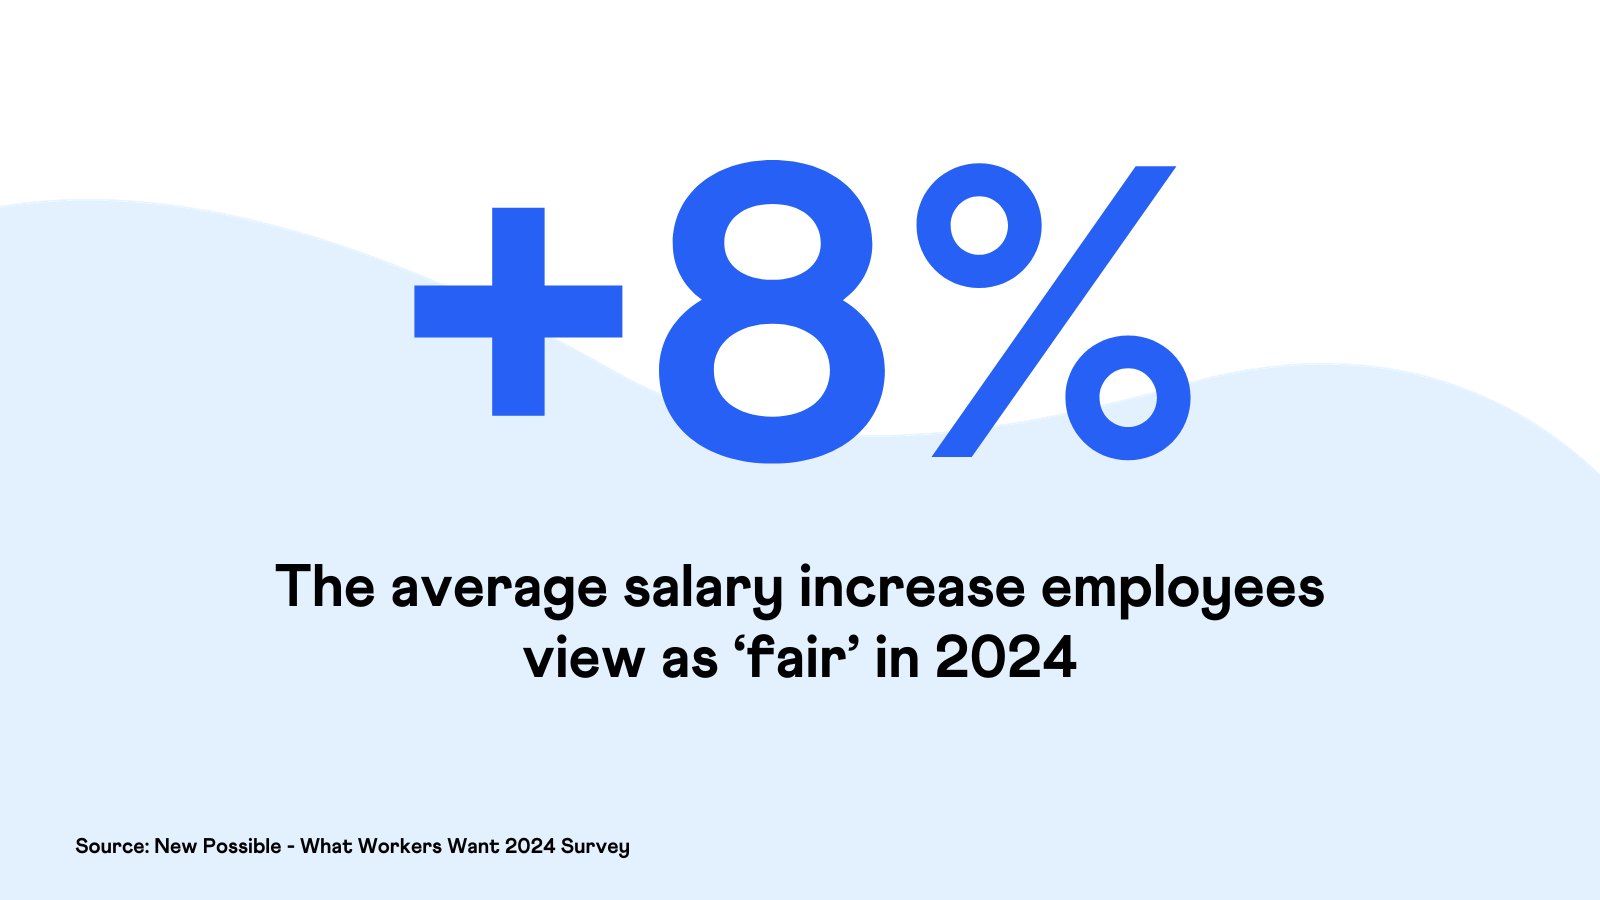 New Possible - What Workers Want 2024 - What is a fair salary increase